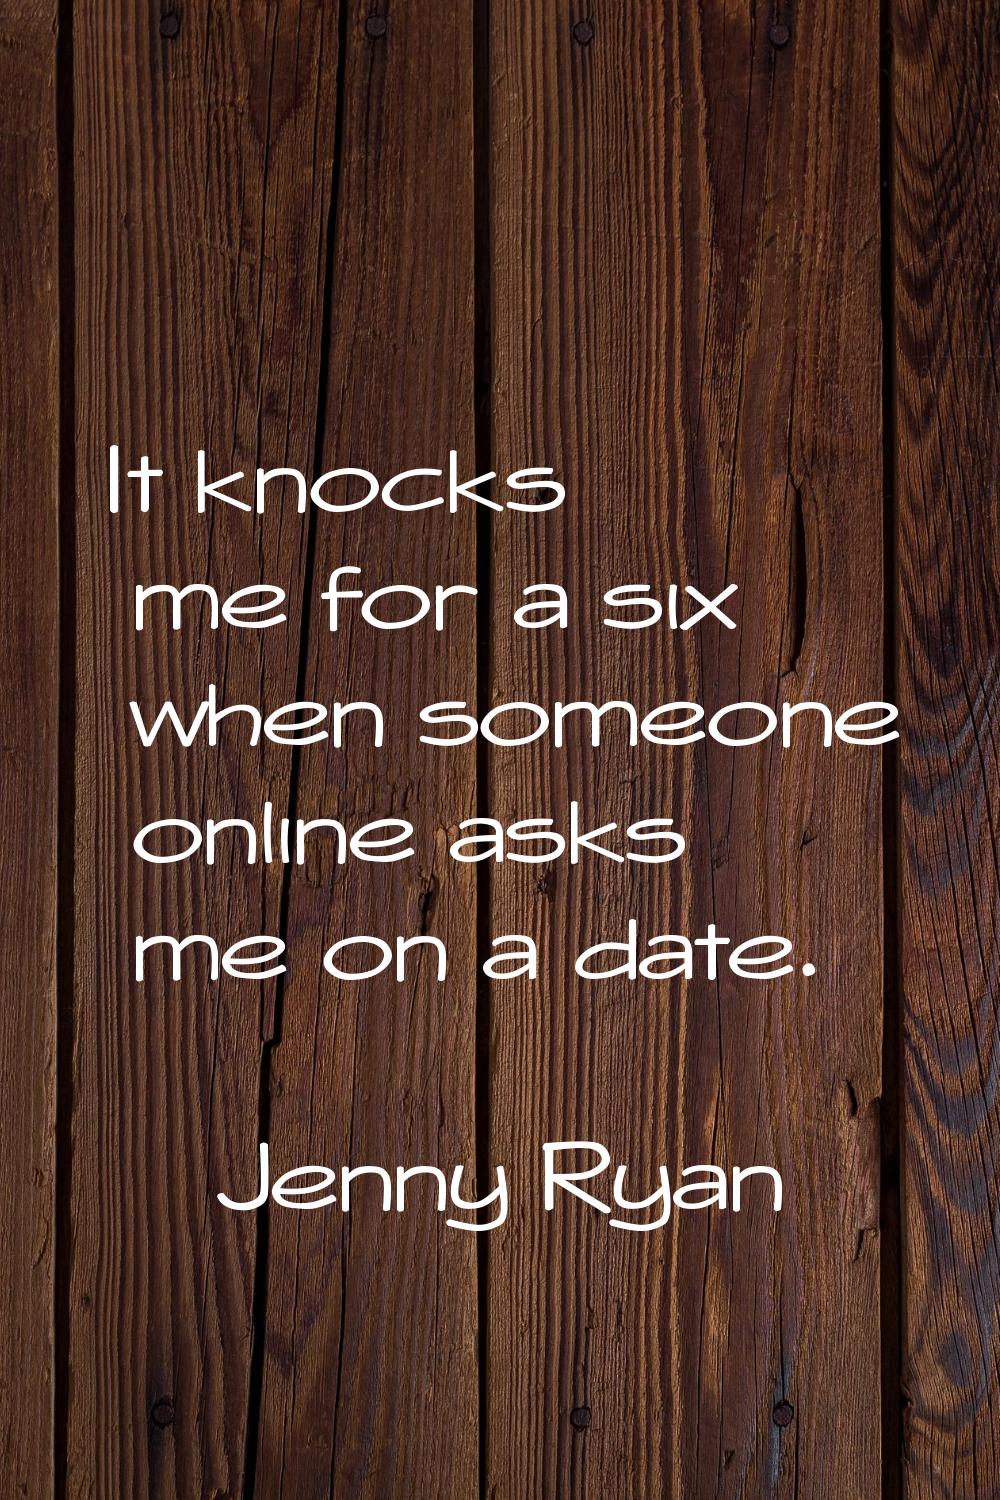 It knocks me for a six when someone online asks me on a date.